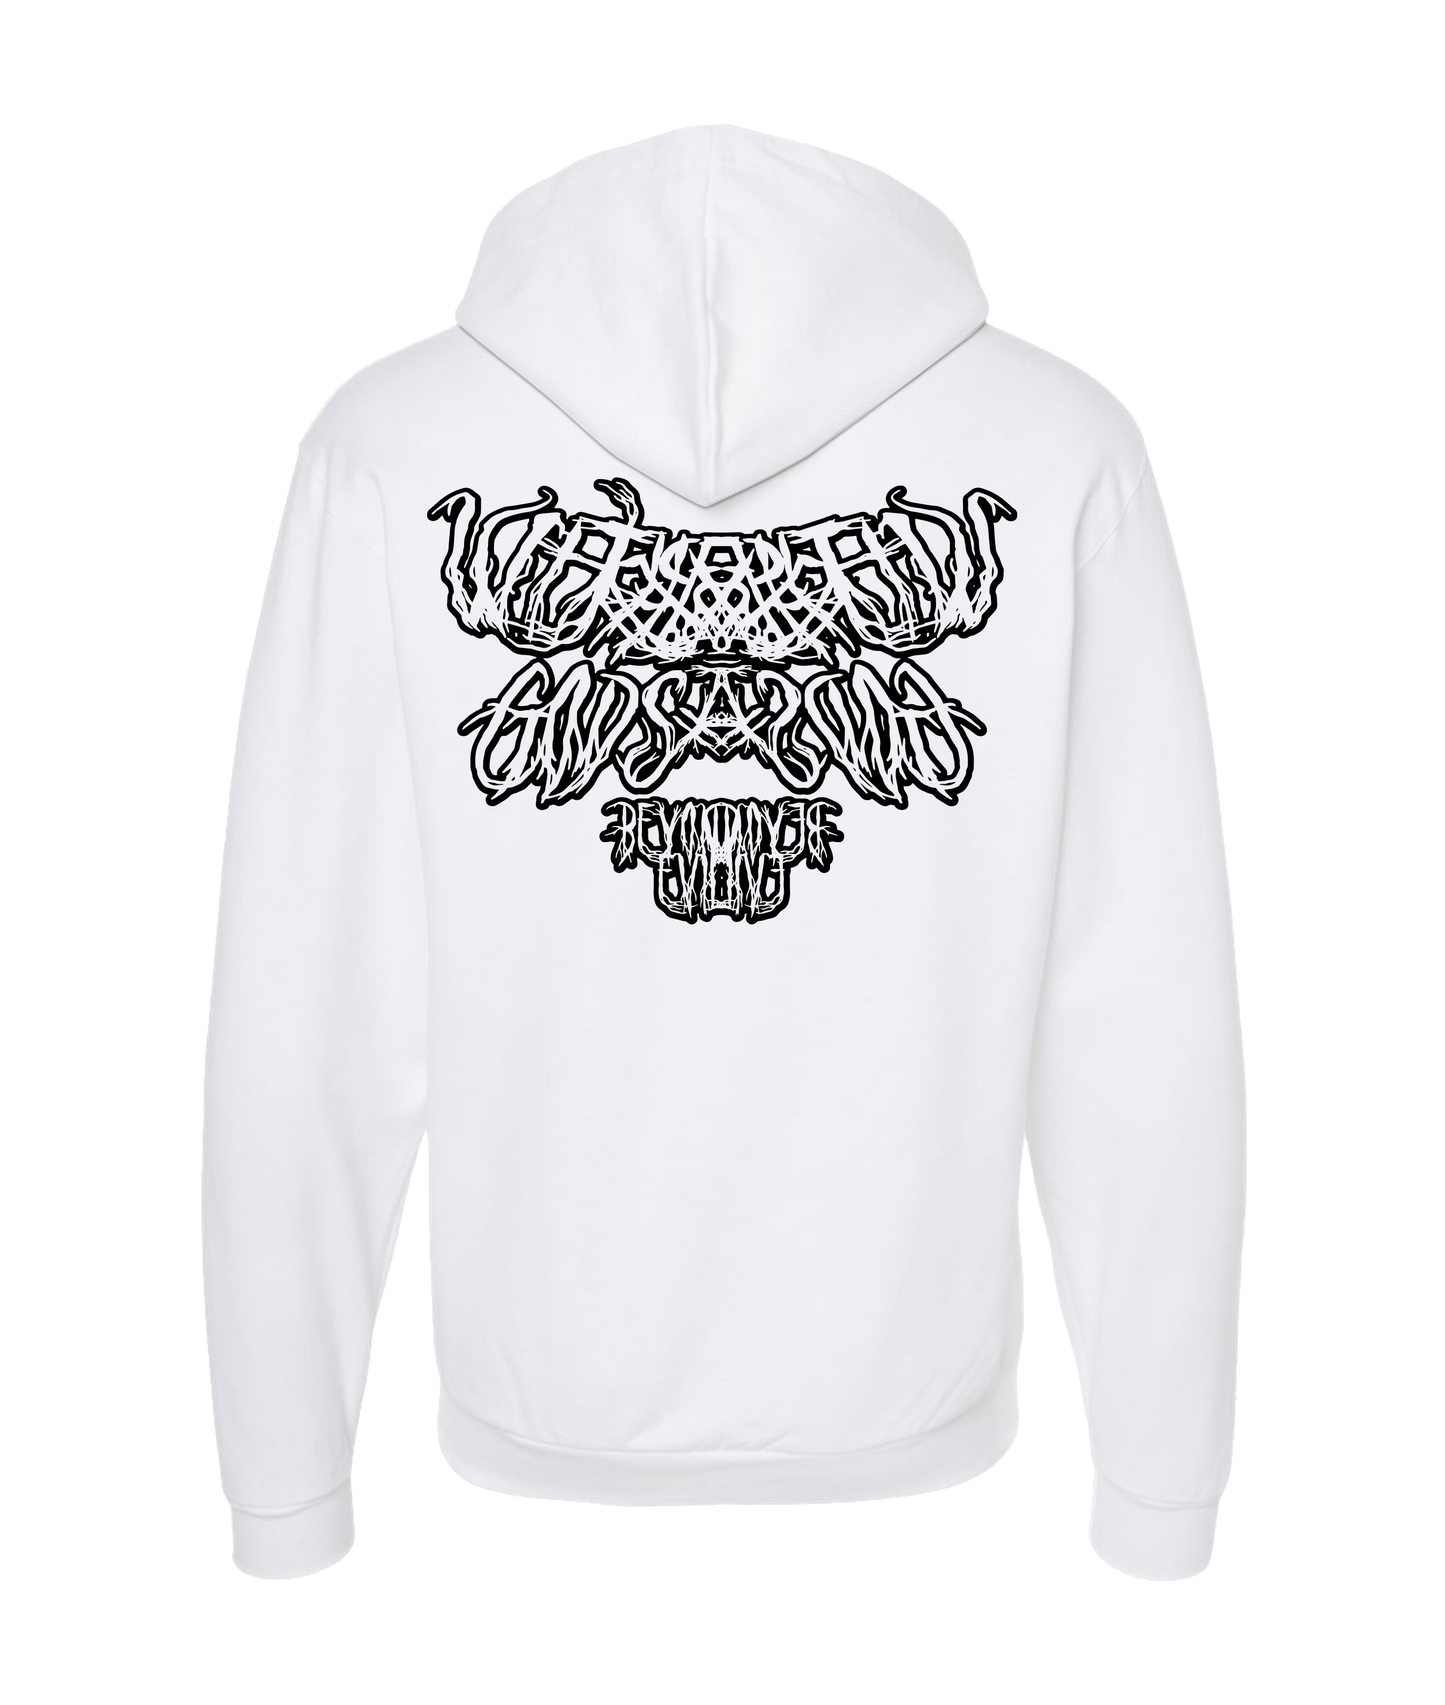 Withered Gods - Logo - White Zip Up Hoodie